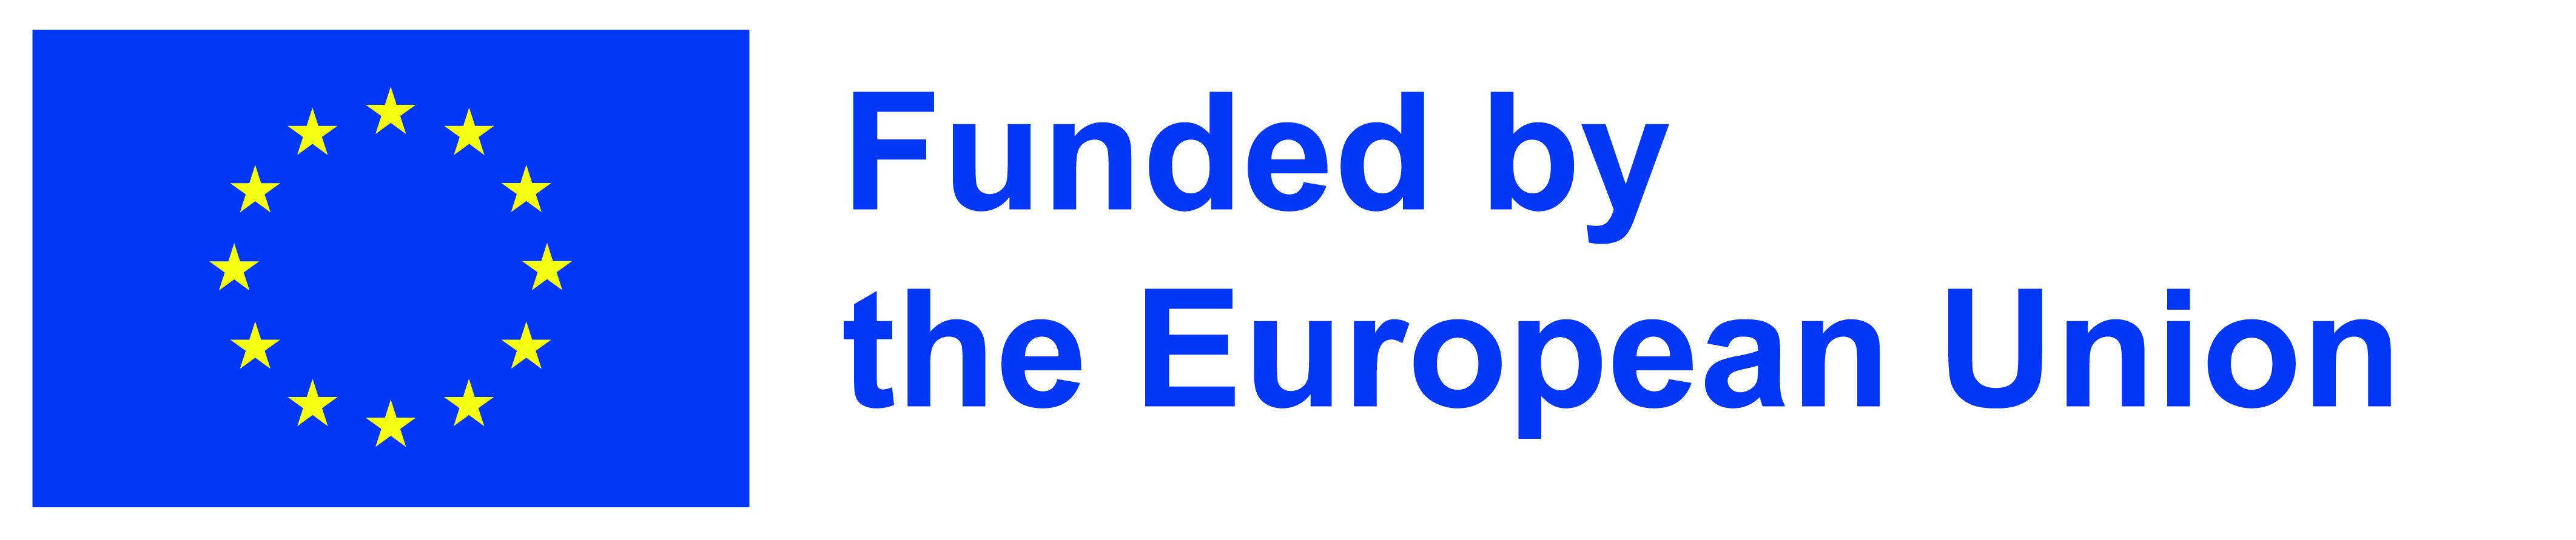 funded by Europe logo